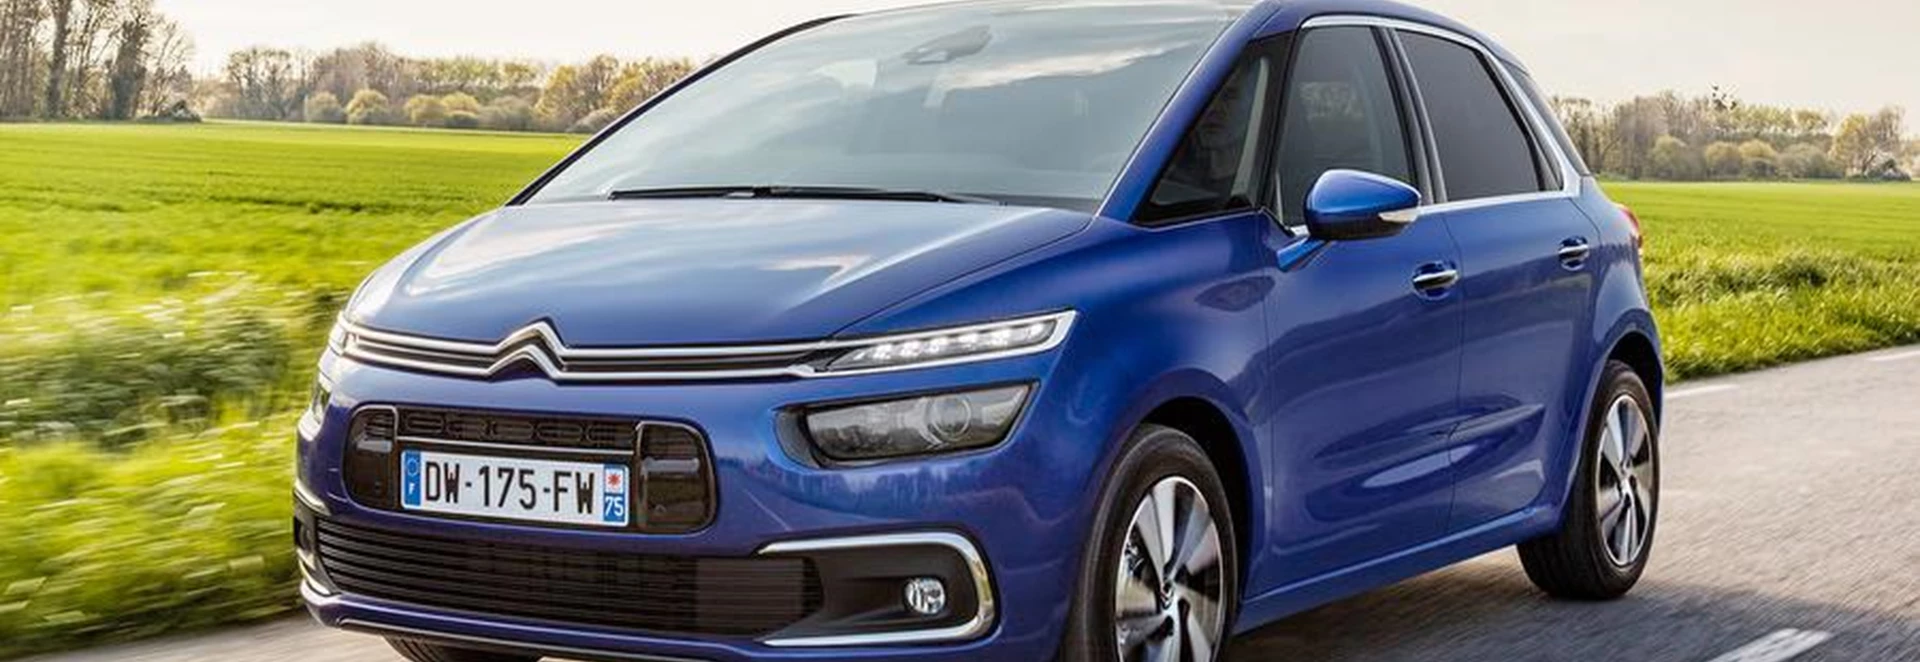 Citroen C4 Picasso range gets new engines and tech